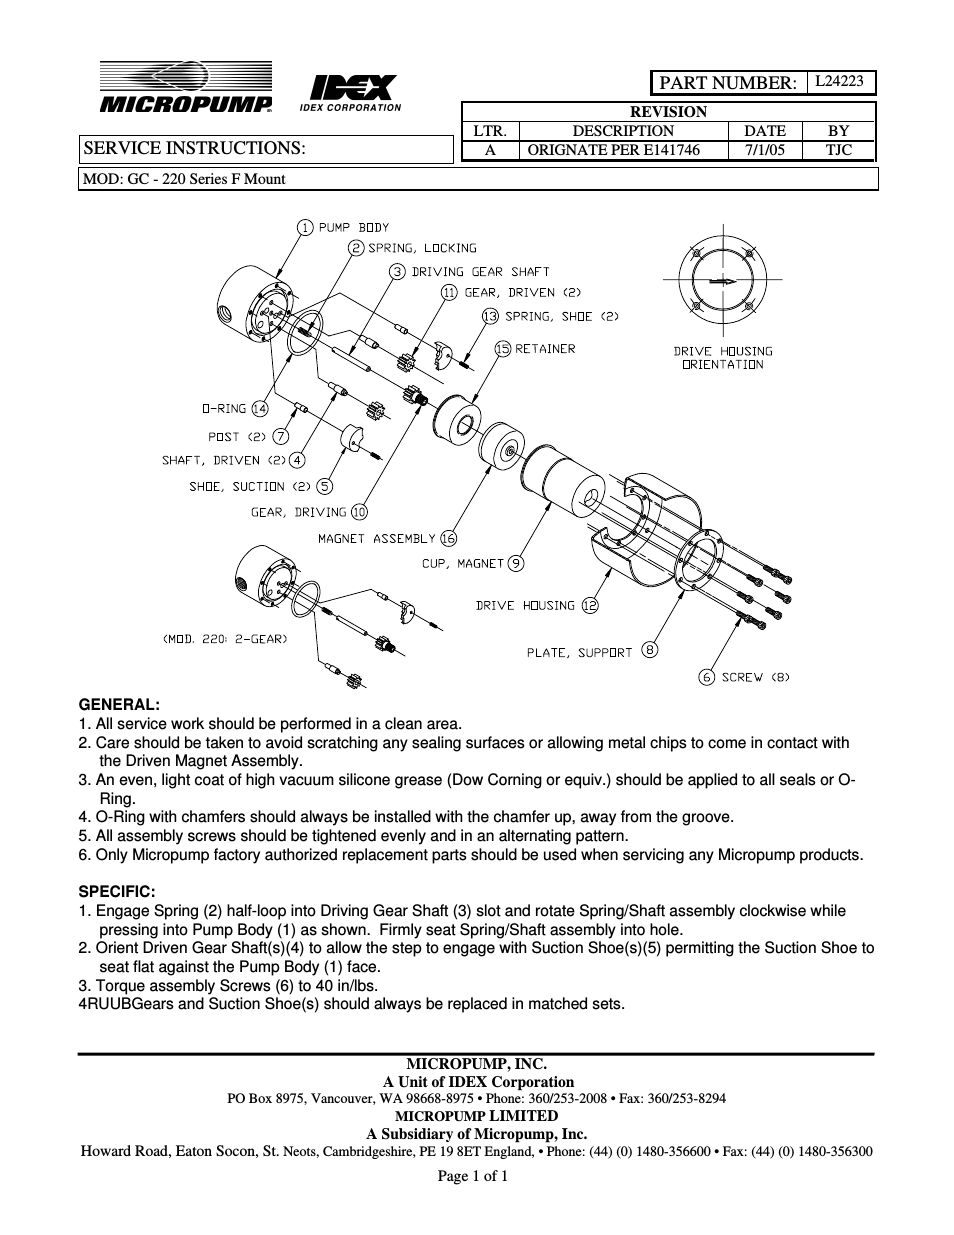 GC Series Service Instructions - F Mount